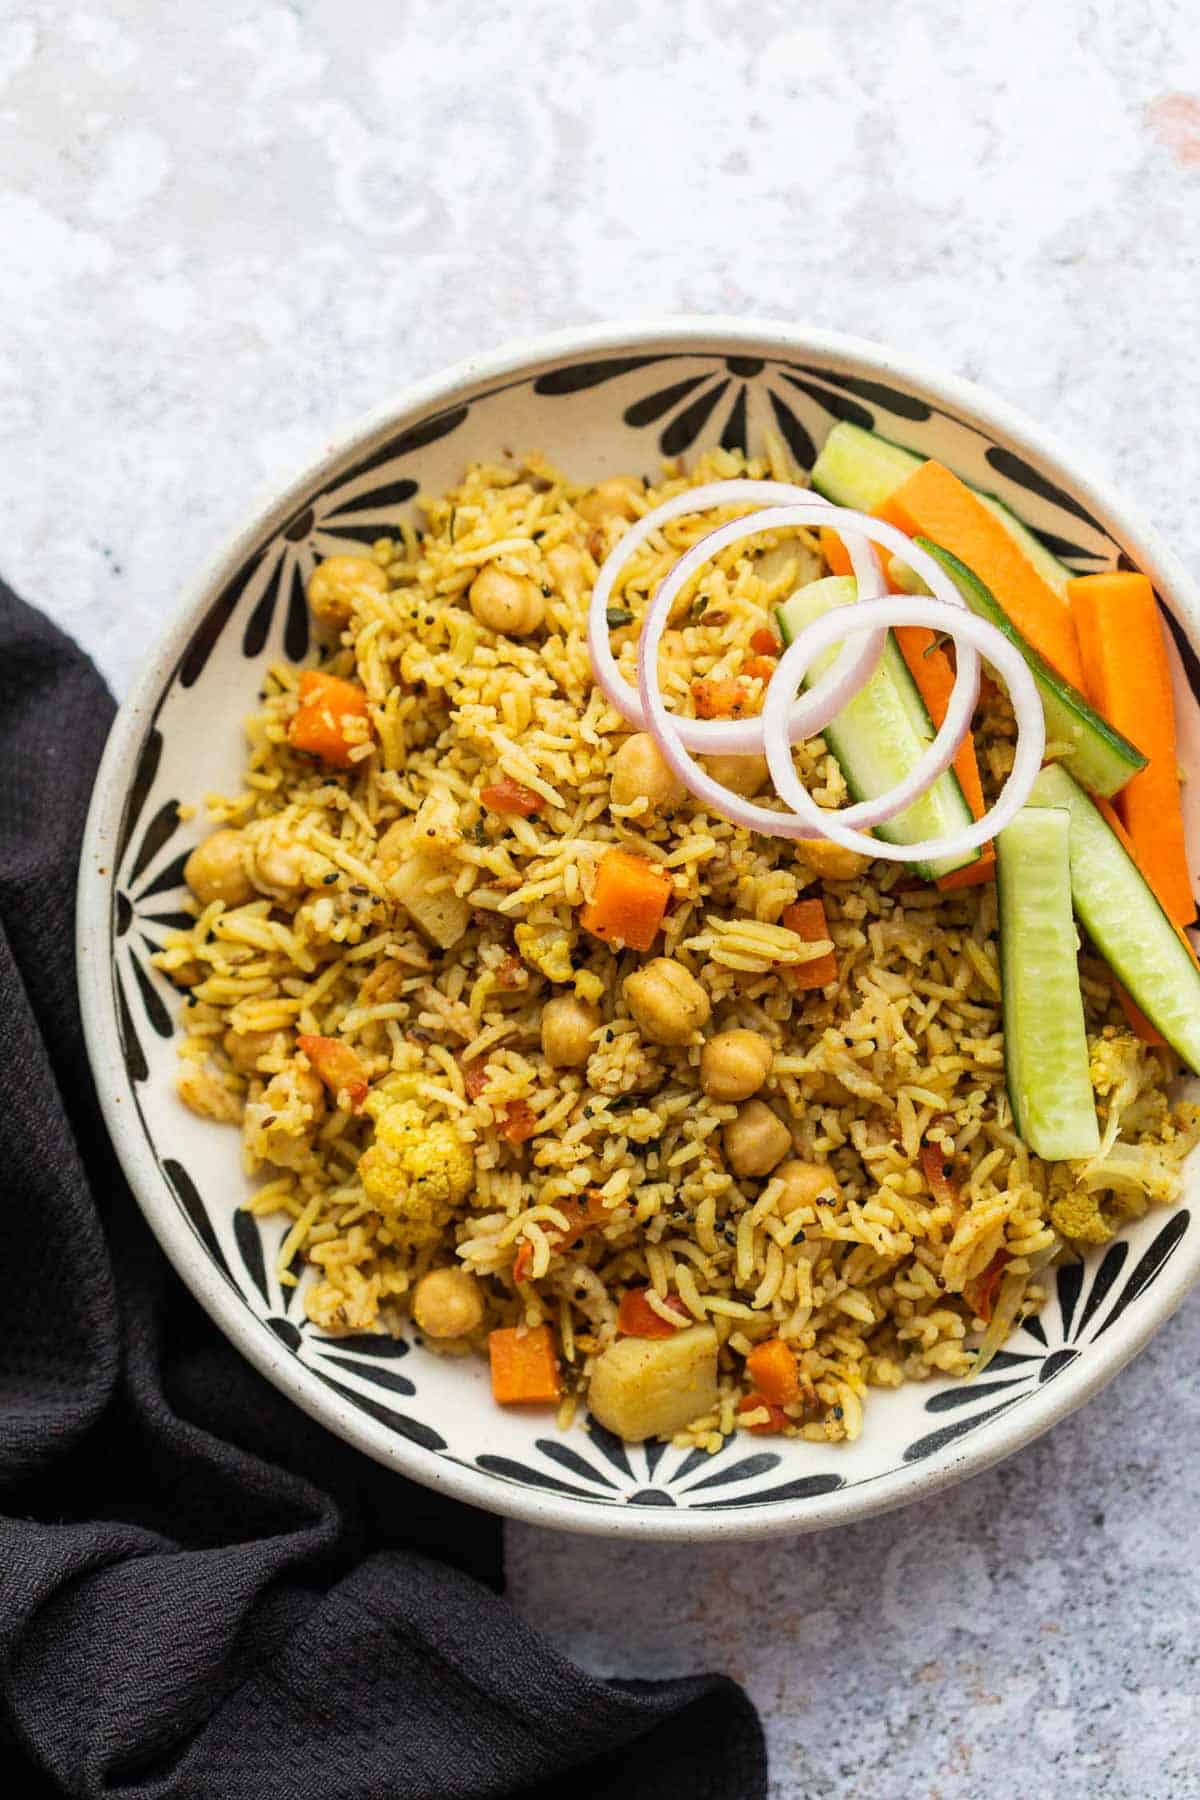 Kabuli Chana Pulao served in a bowl with onions and a salad